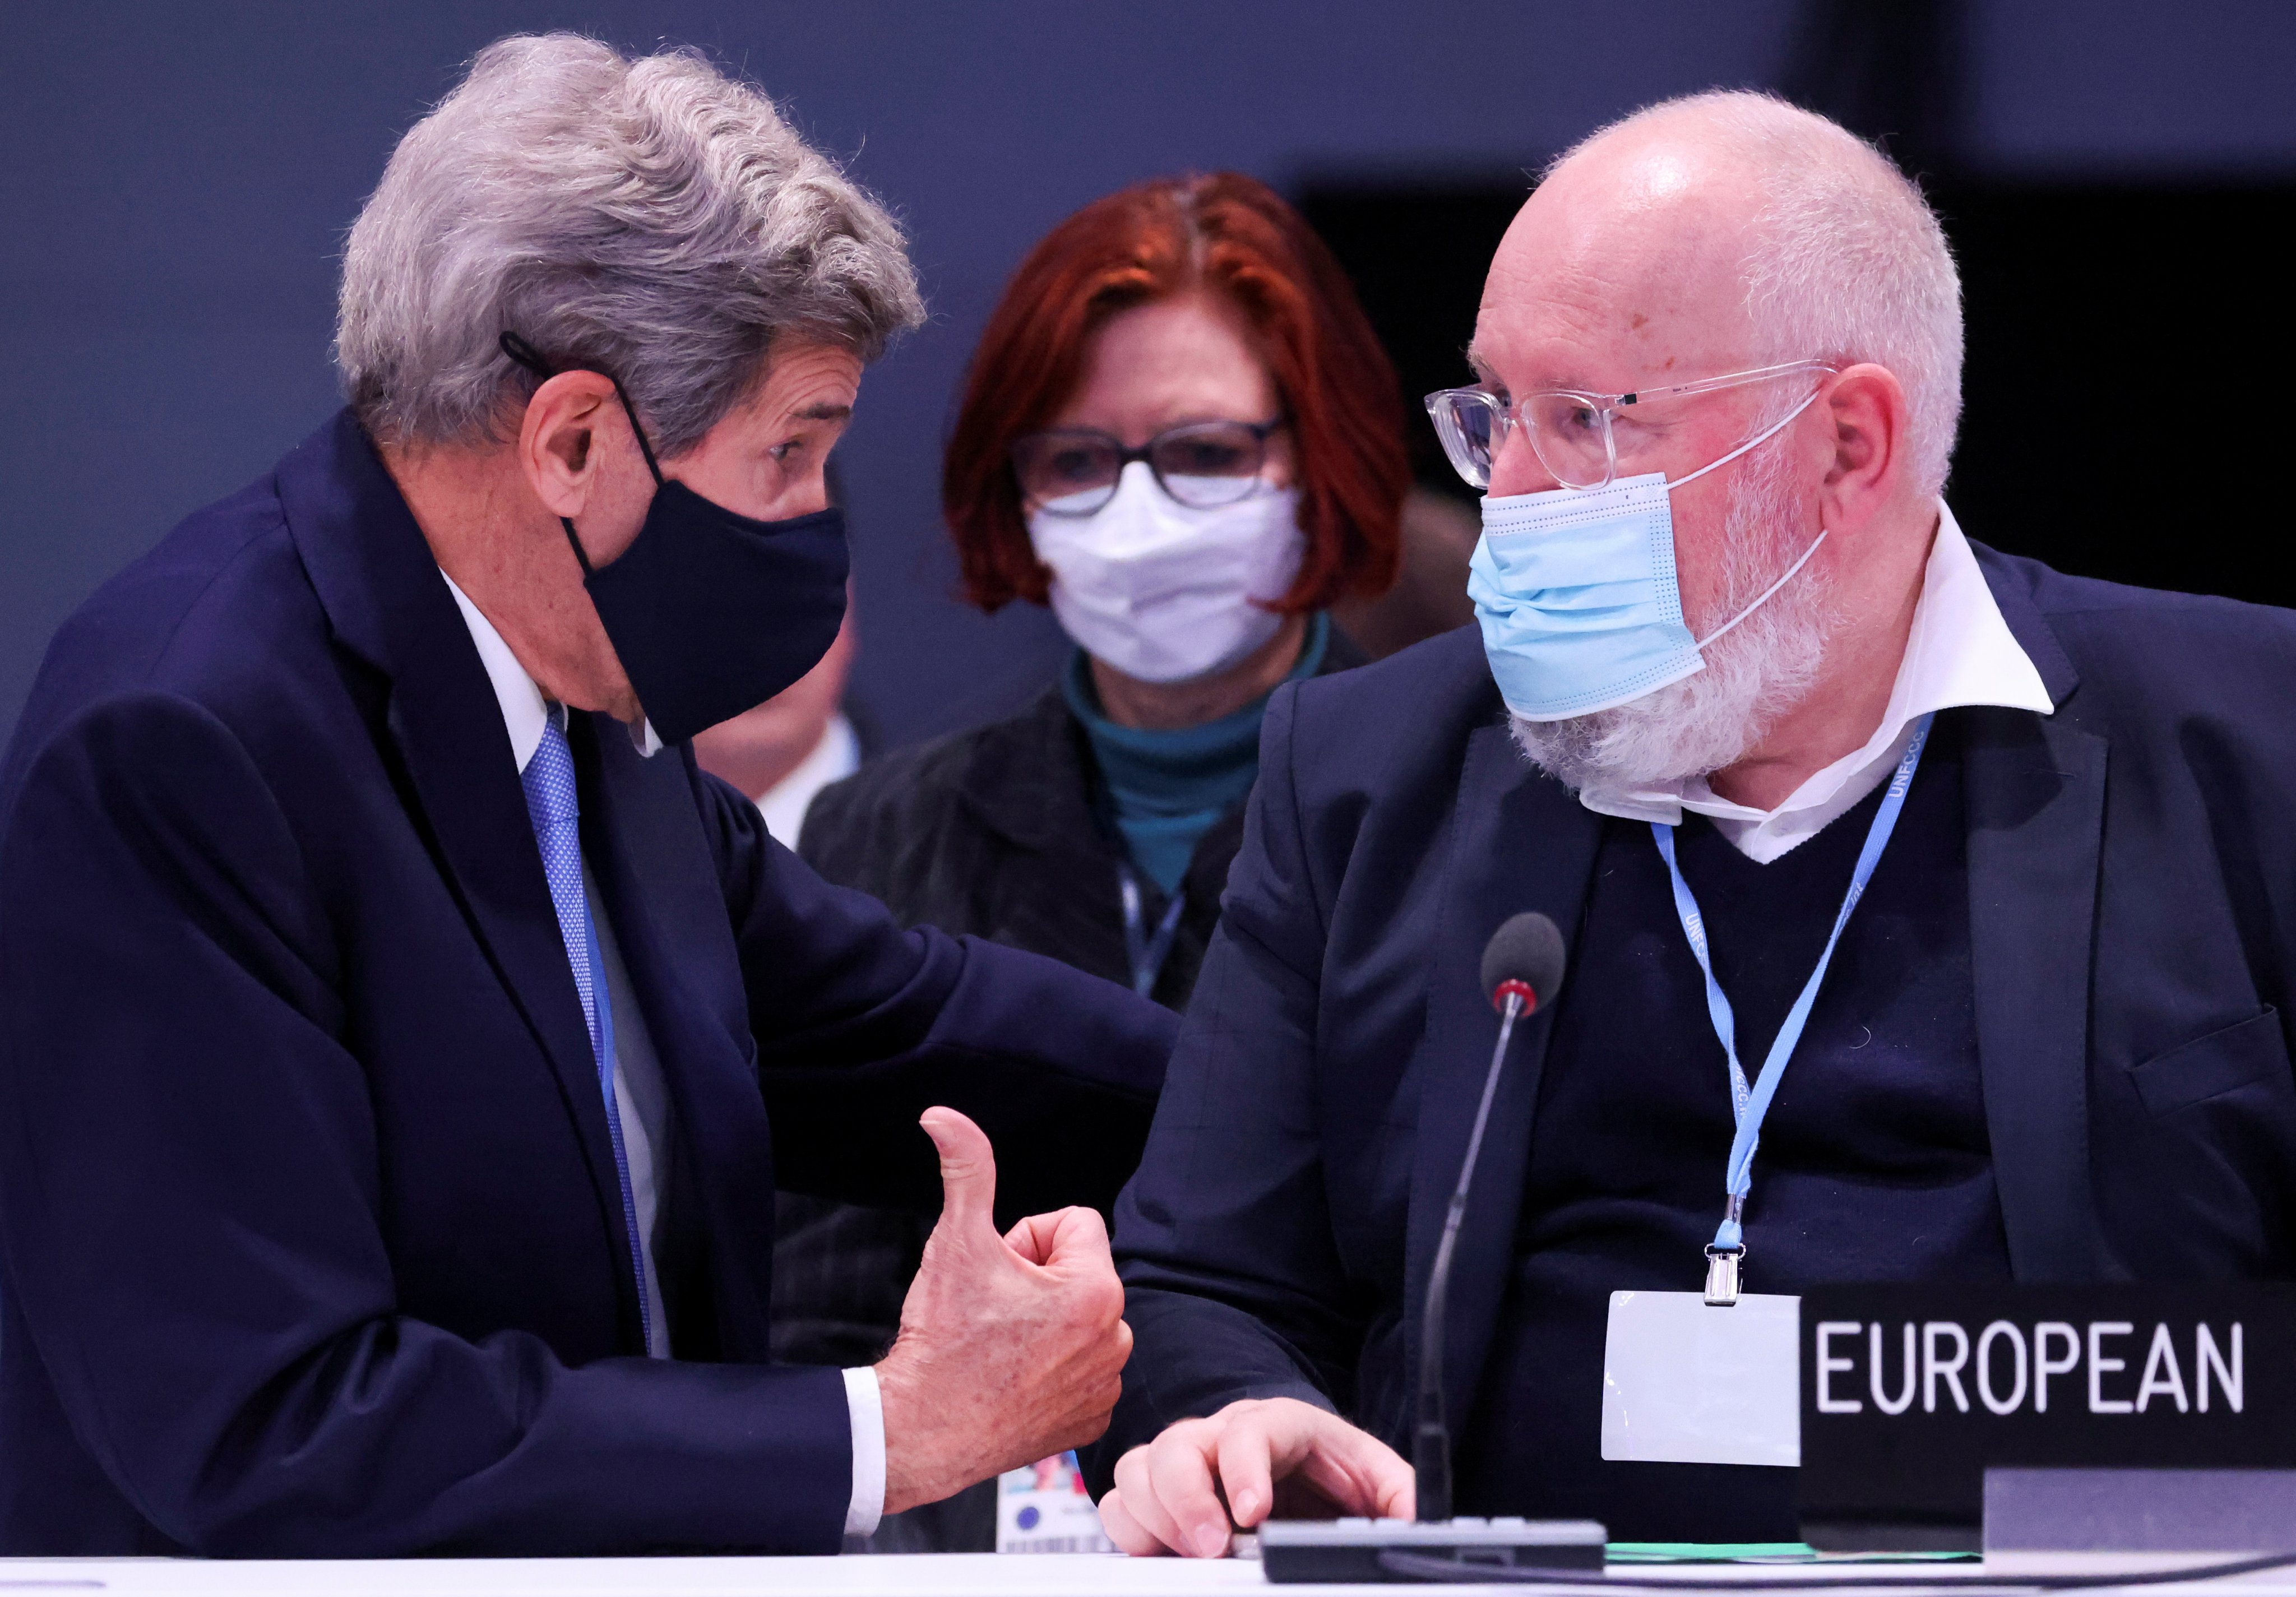 US climate envoy John Kerry speaks to EU climate czar Frans Timmermans at the COP26 UN climate change conference in Glasgow, Scotland, on November 12, 2021. Photo: Reuters